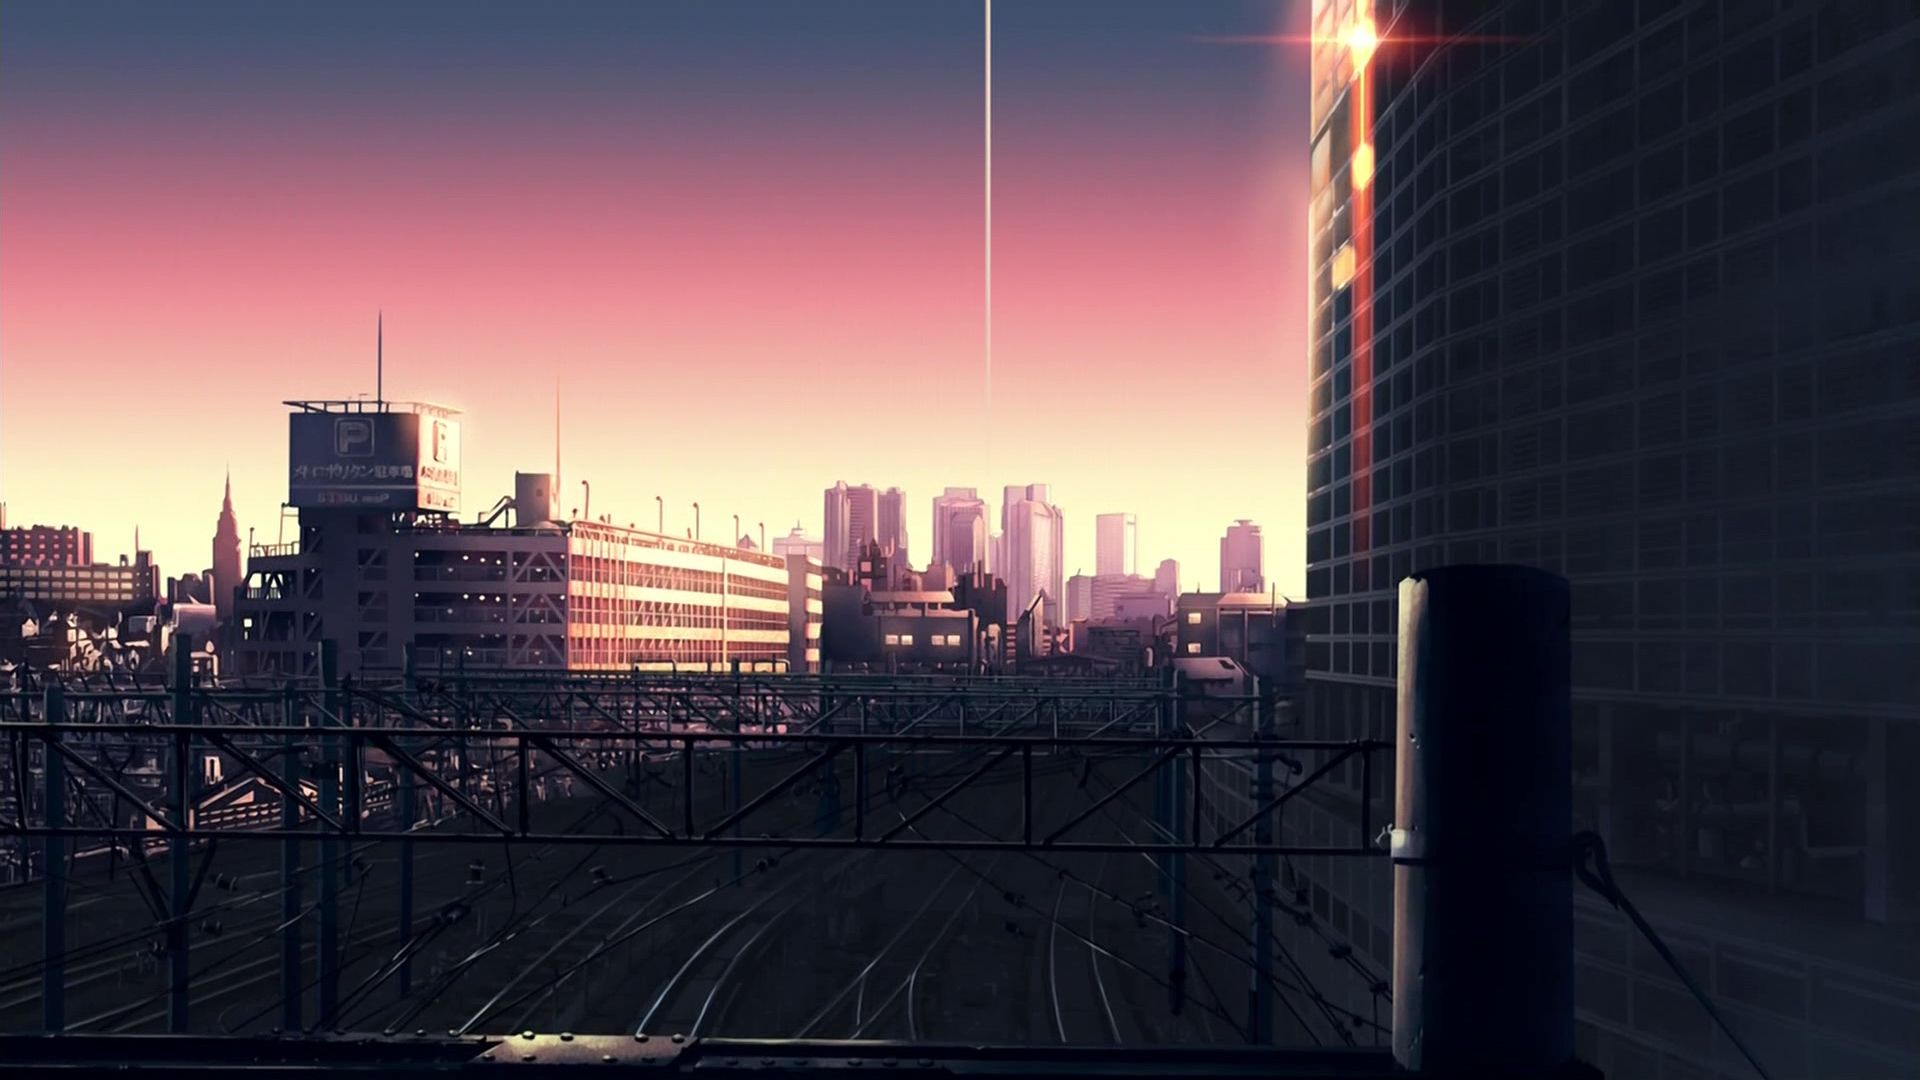 sunset, cityscapes, railroad tracks, buildings, anime